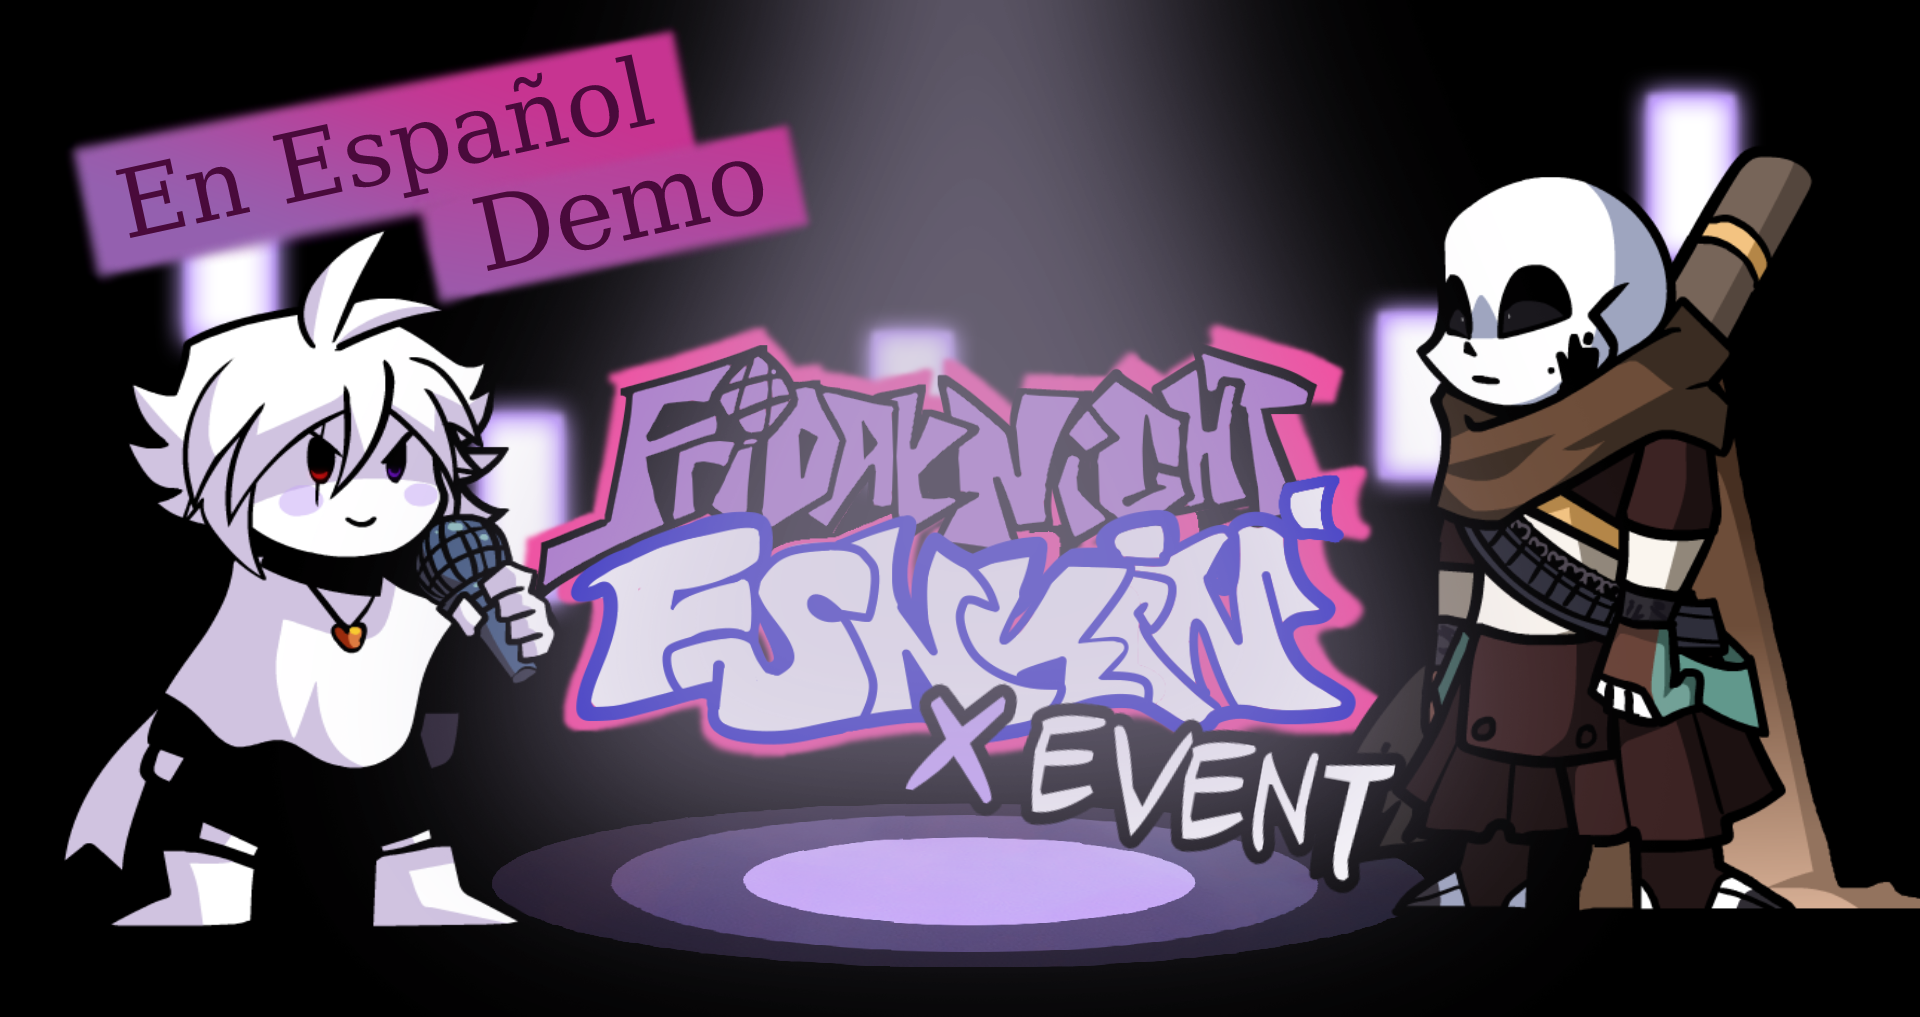 Roblox: [X EVENT] Even more FNF 2